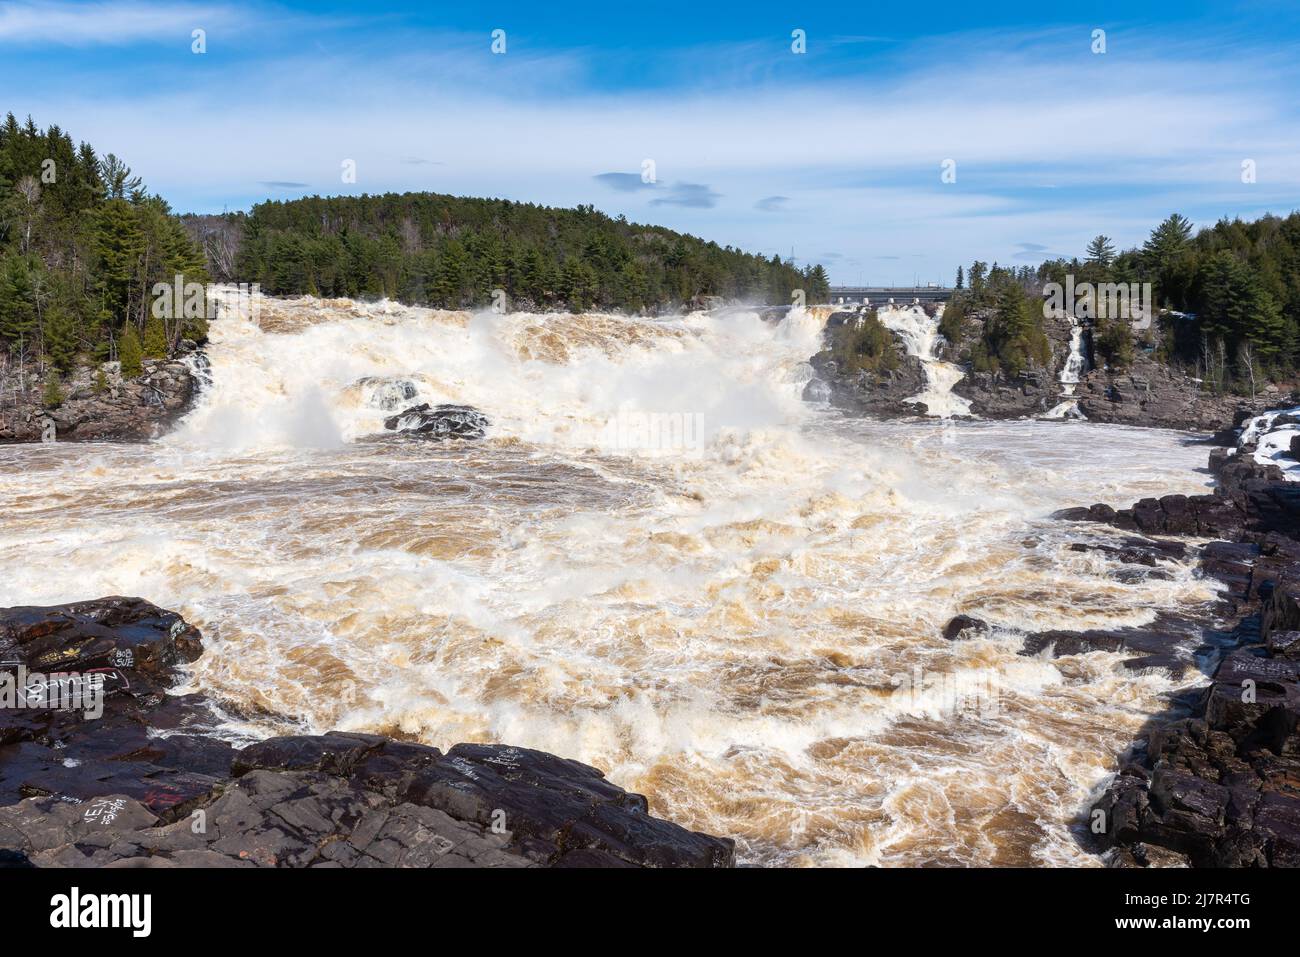 The St Maurice river at the Shawinigan devil’s hole during the spring floods, Quebec, Canada Stock Photo